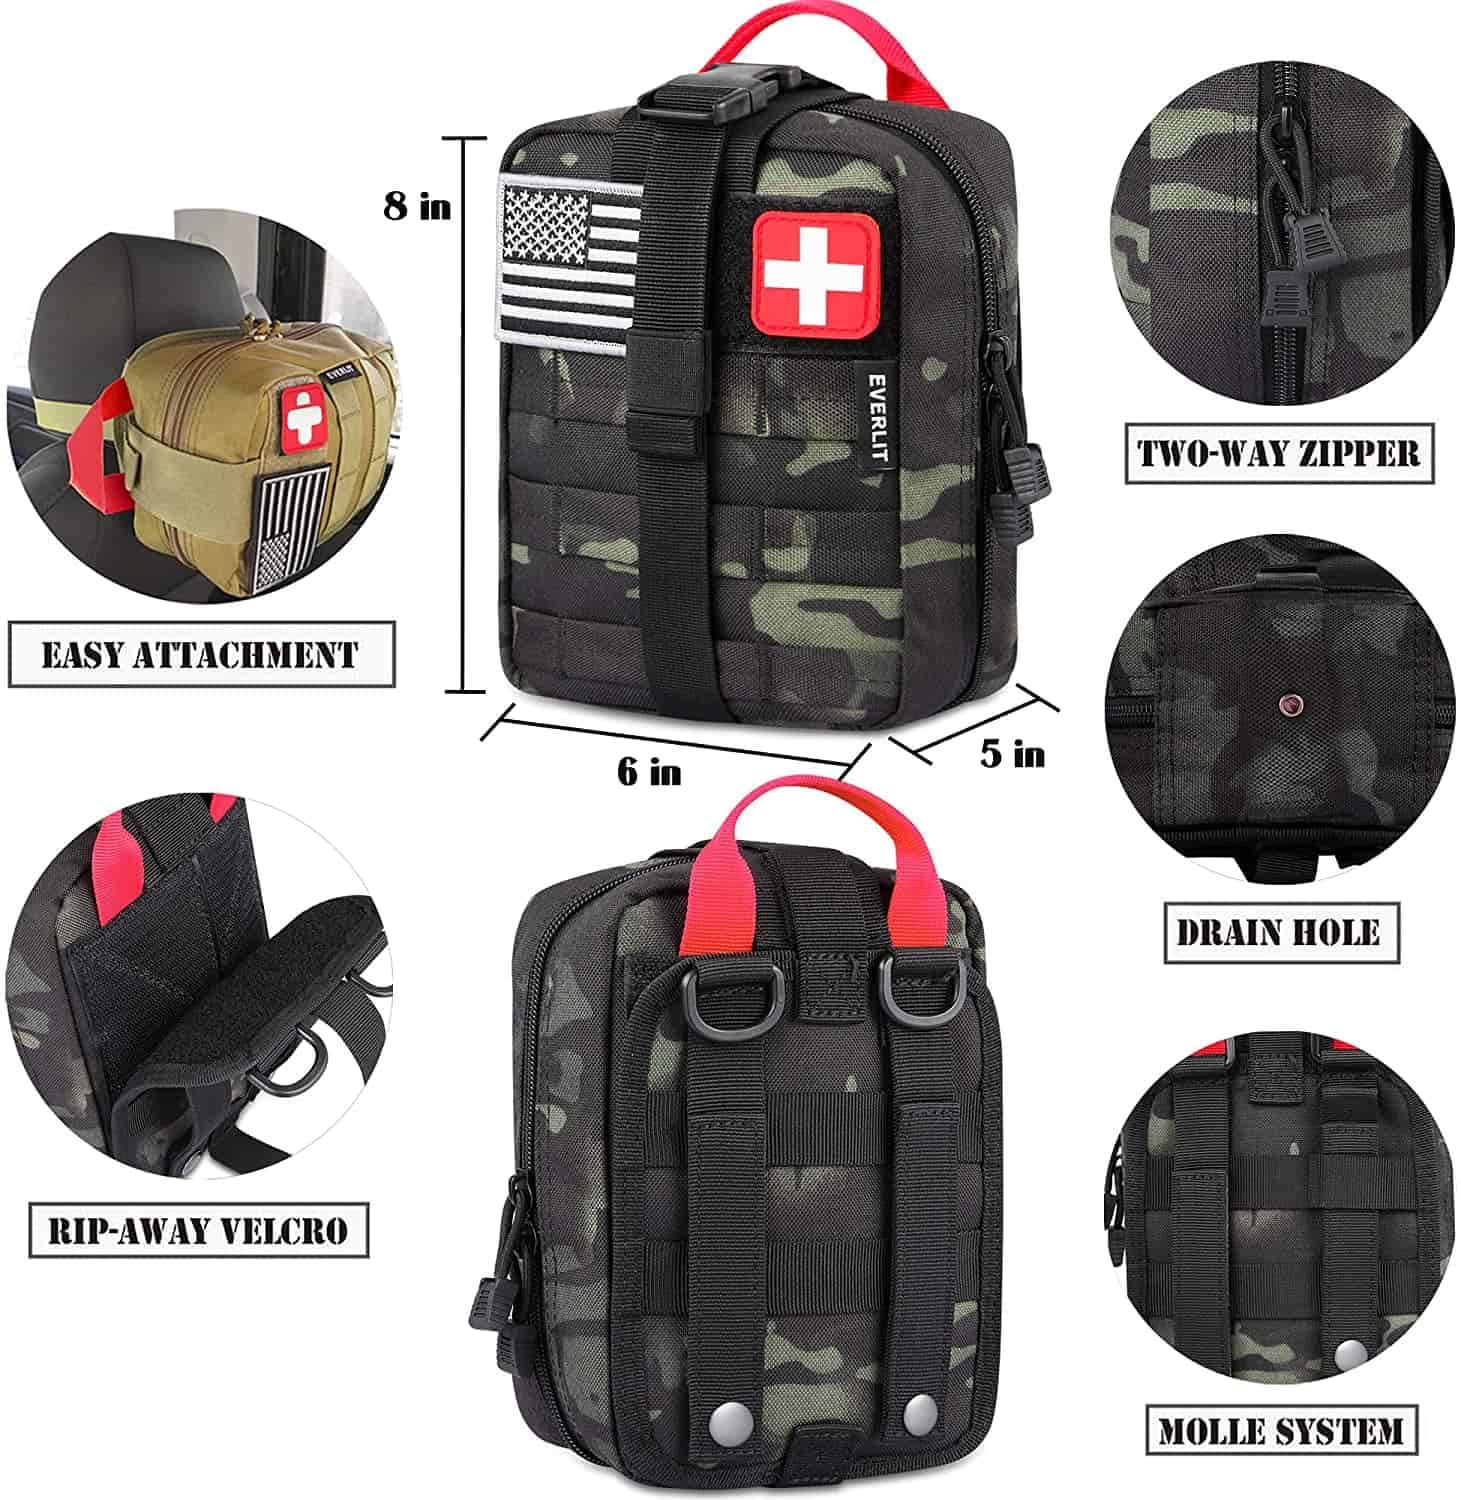 Black Camo Survival First Aid Kit Contains Contains 250 Piece First Aid Kit - 2